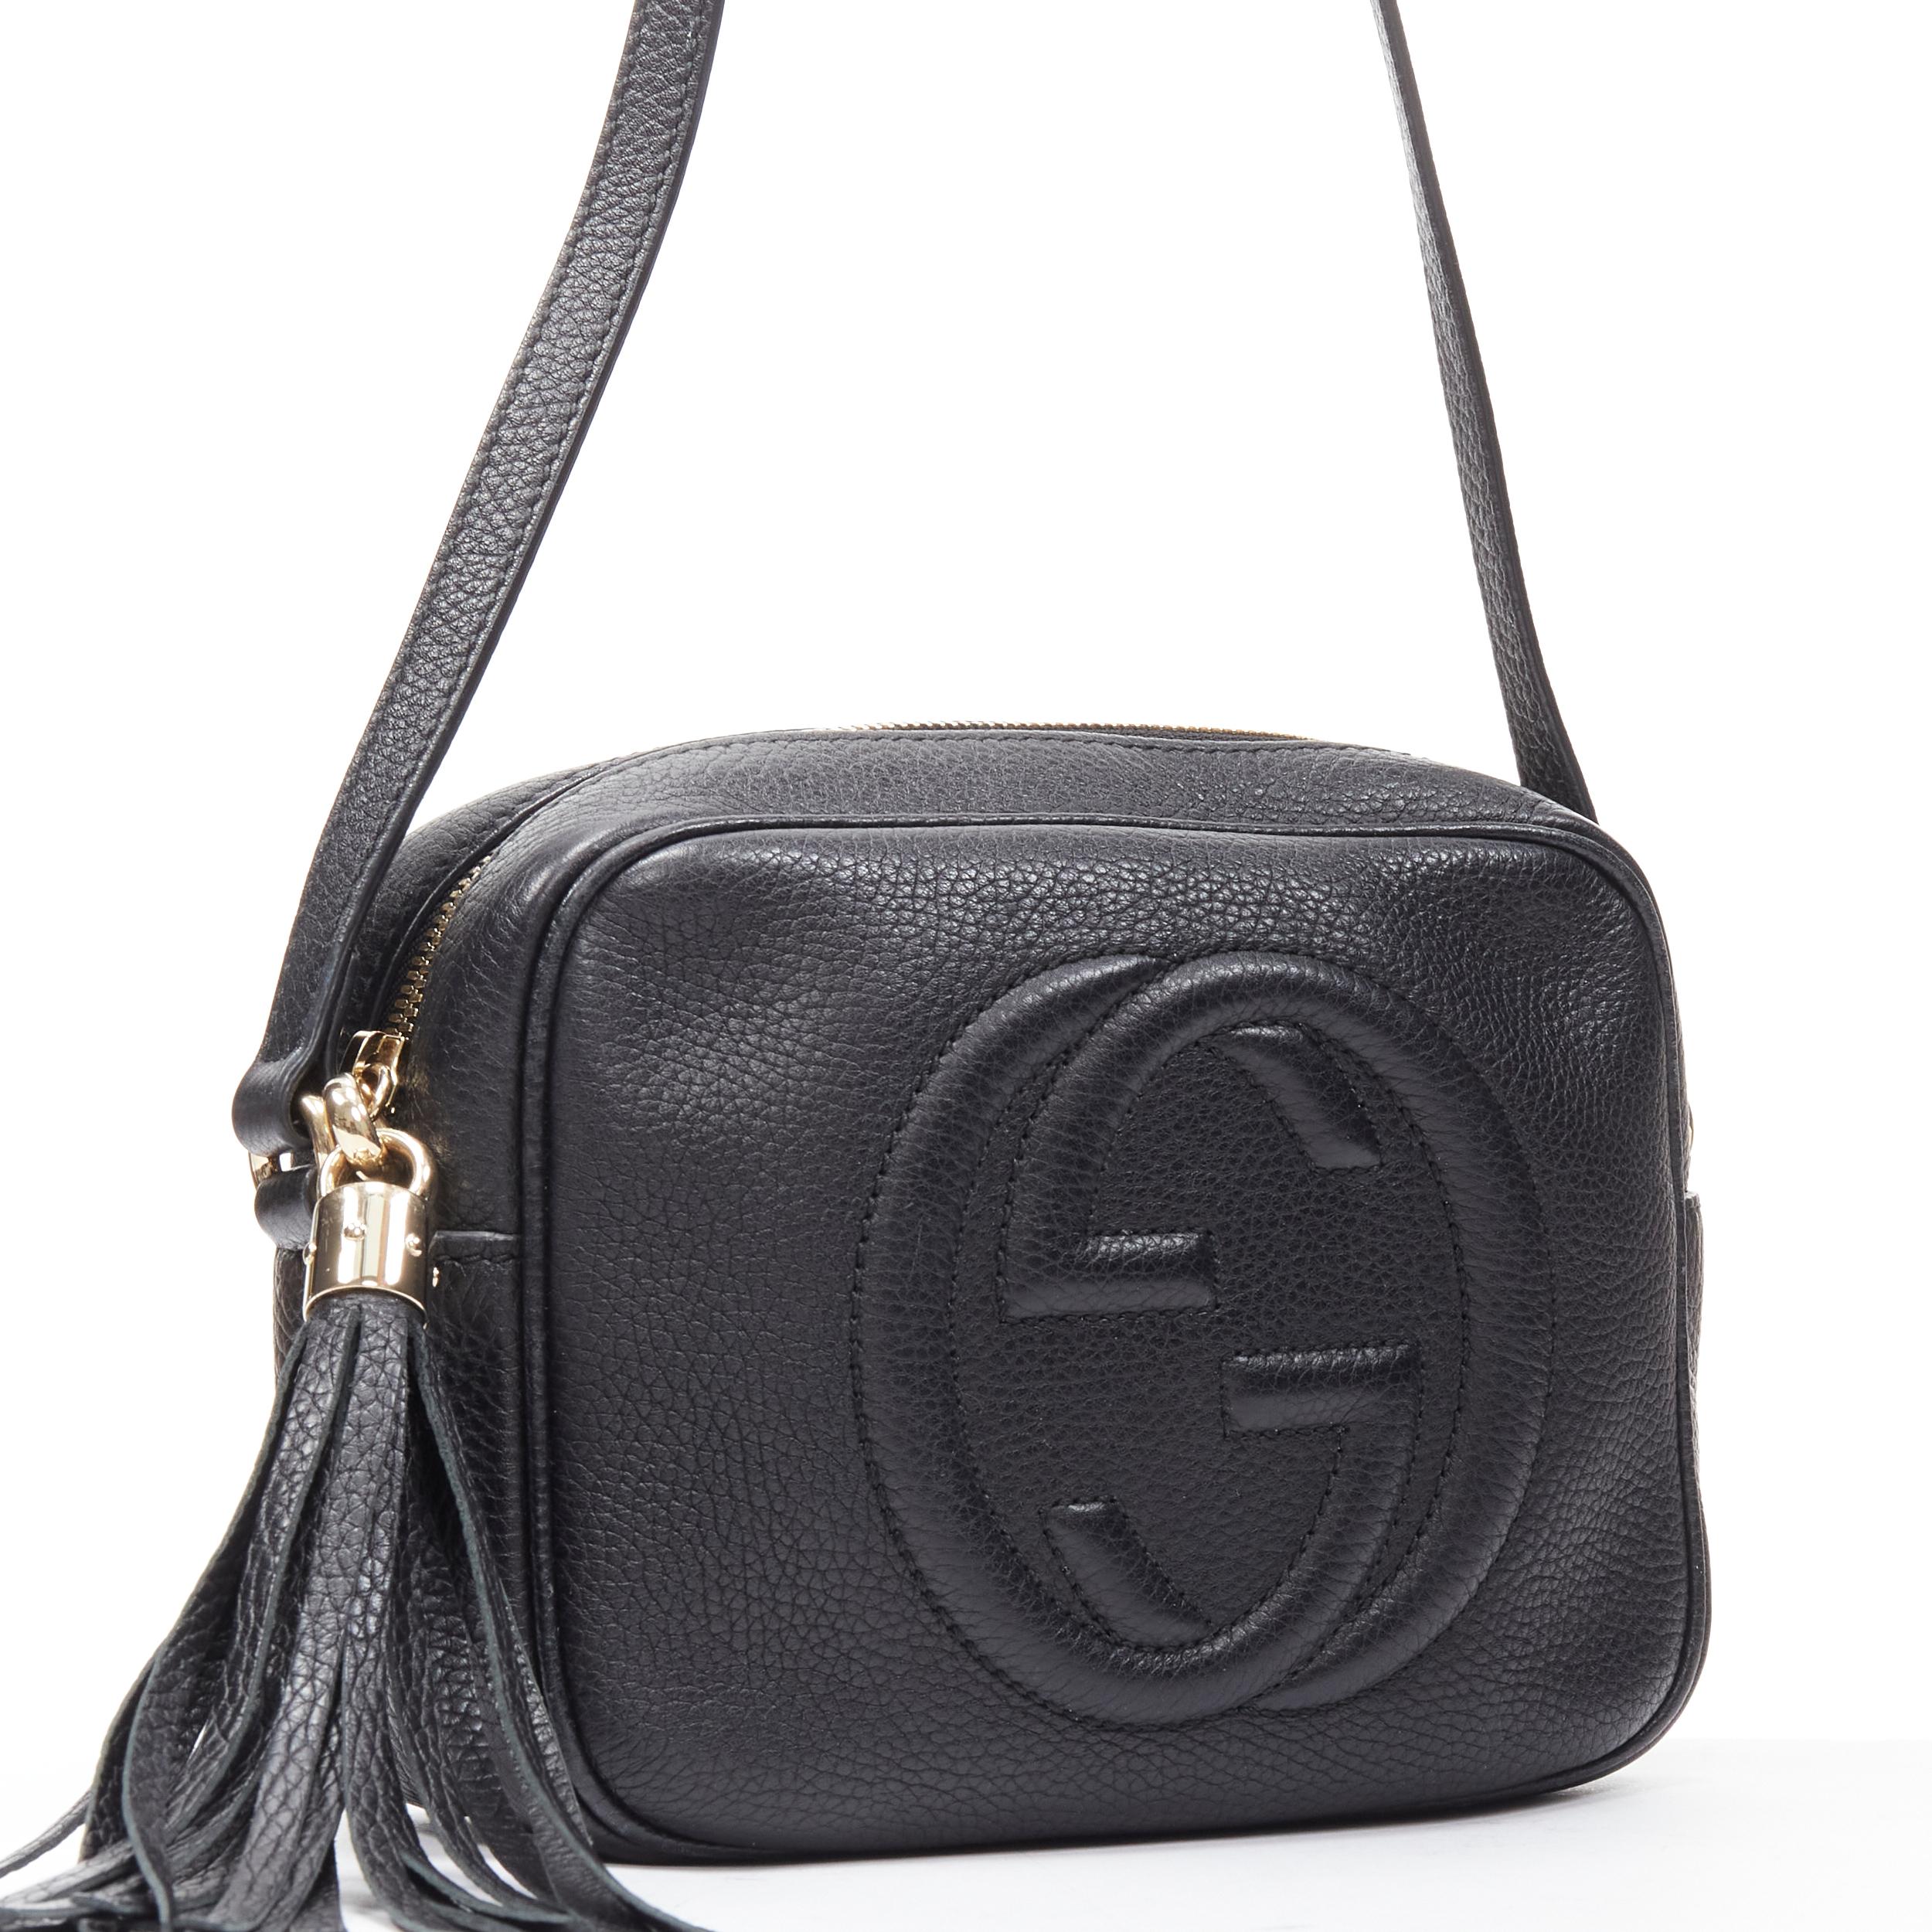 gucci bag with tassle